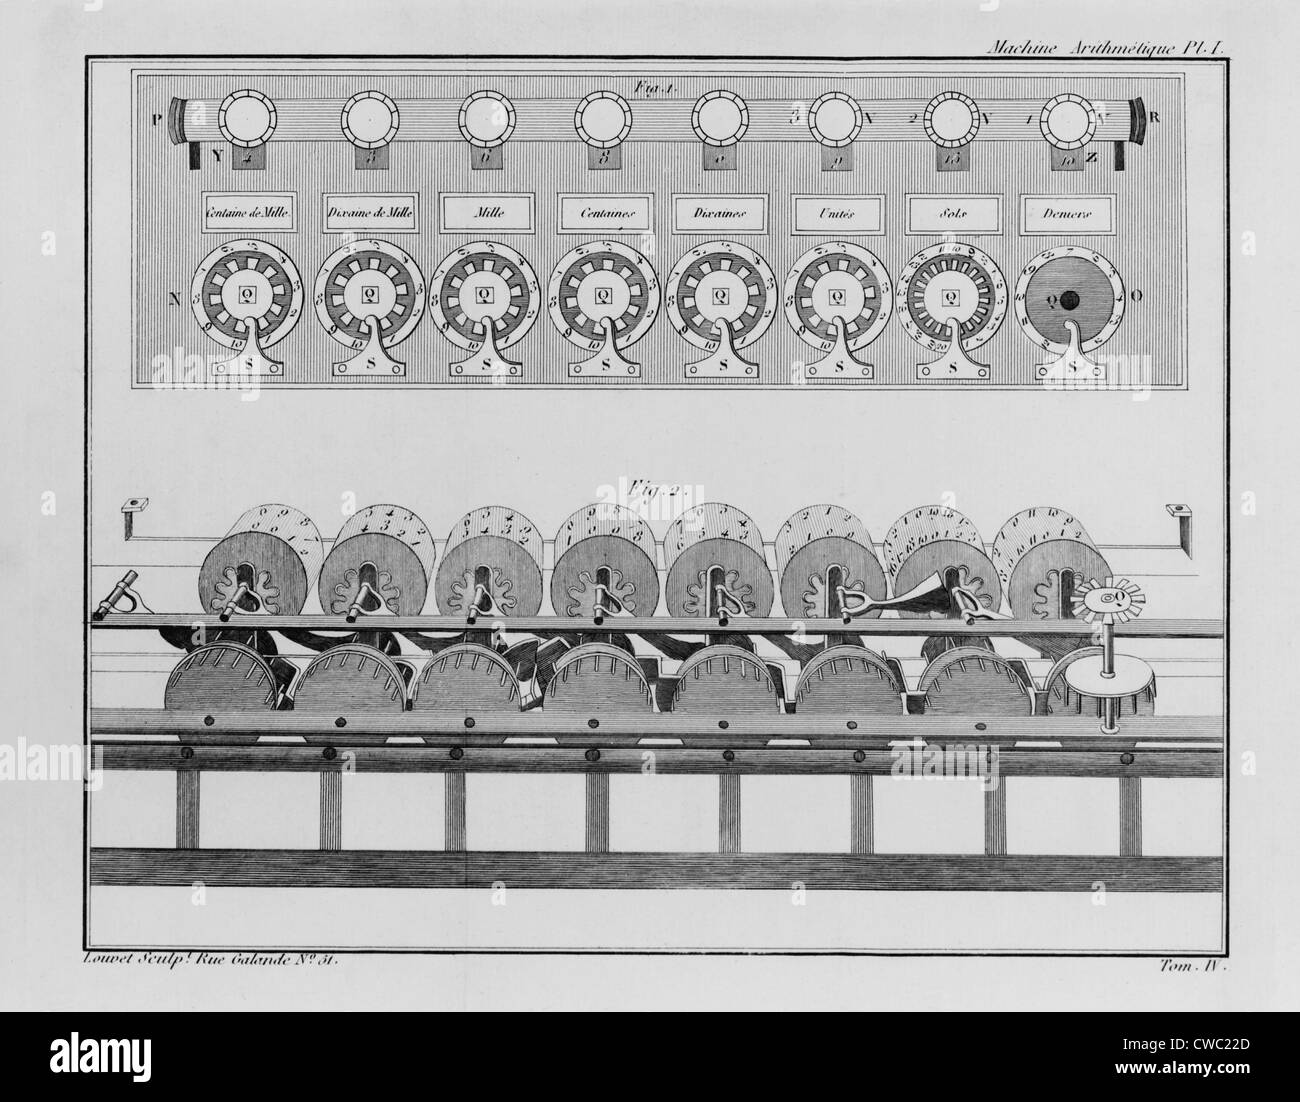 Calculating machine designed by French mathematician Blaise Pascal in 1642 when he was nineteen years old. It could perform Stock Photo